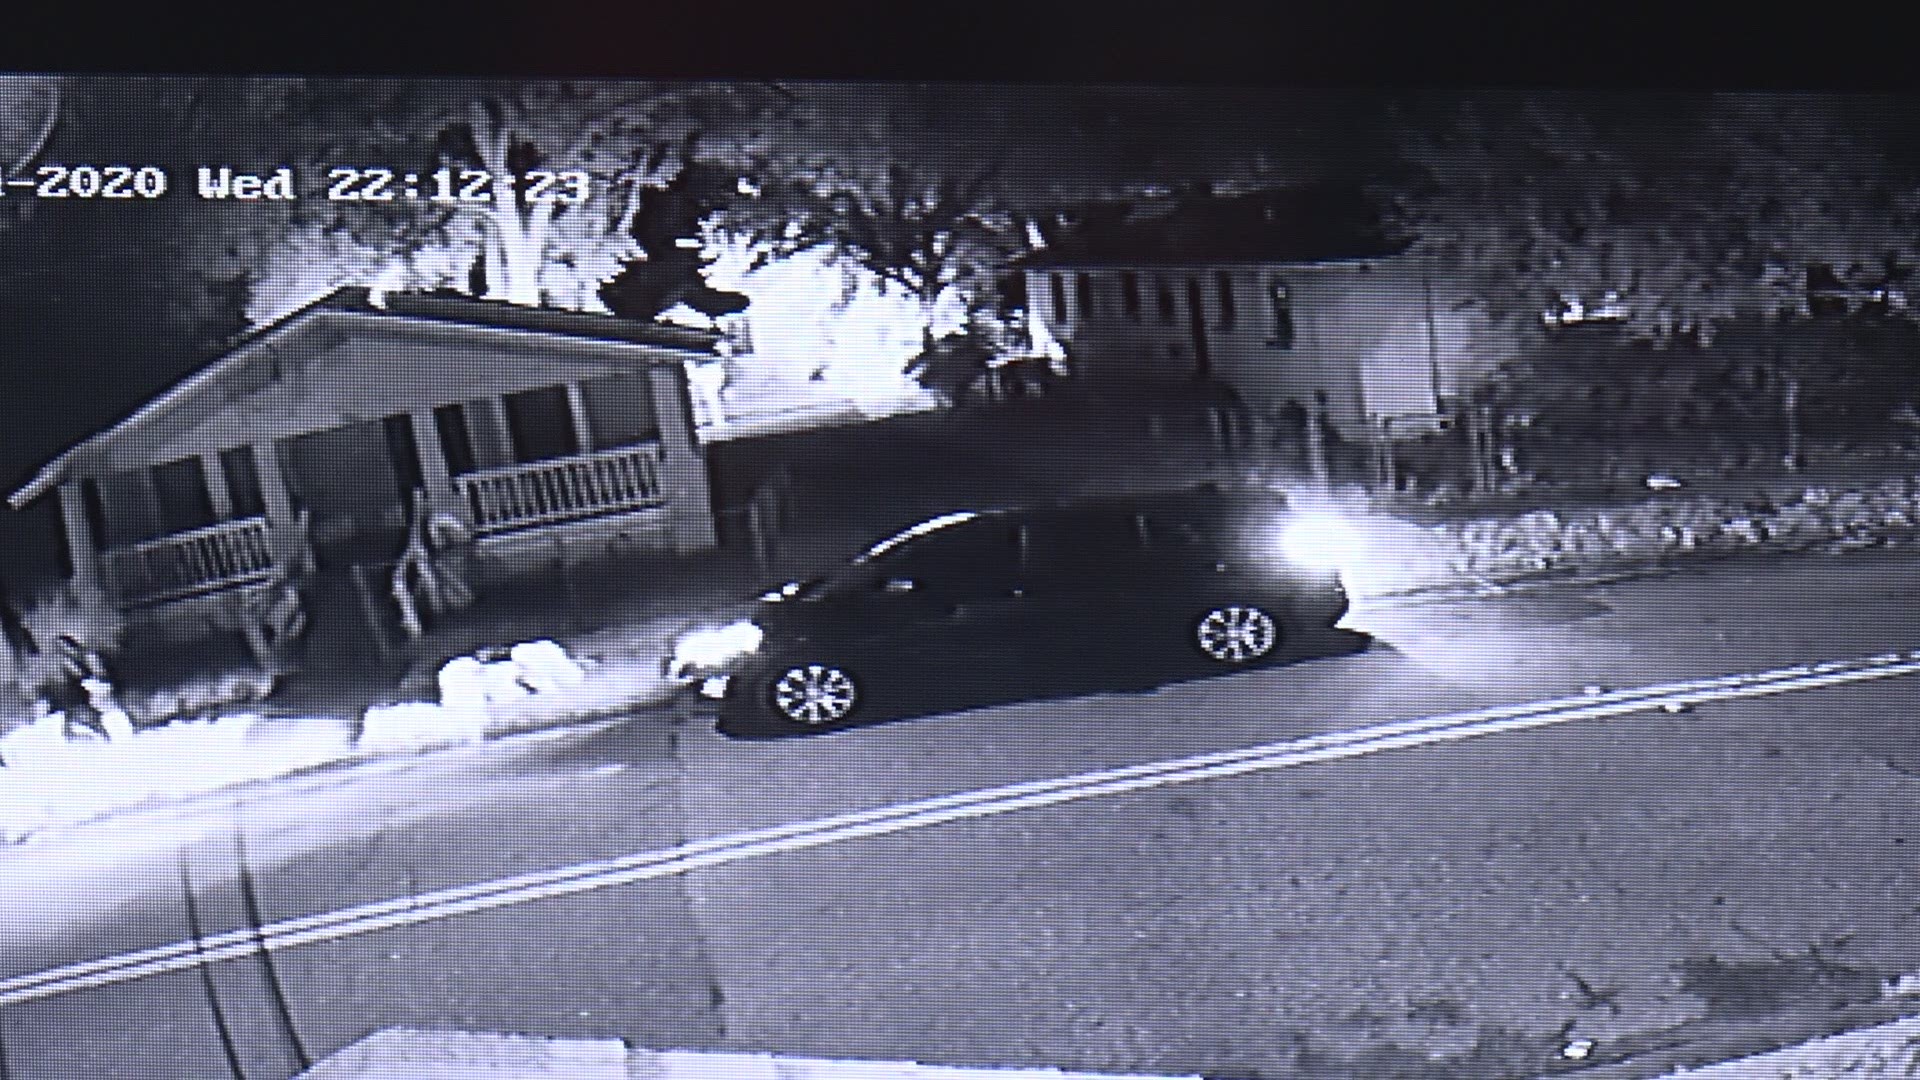 In the video obtained by First Coast News, a man can be seen peering out from behind a home at an unmarked vehicle parked out front.